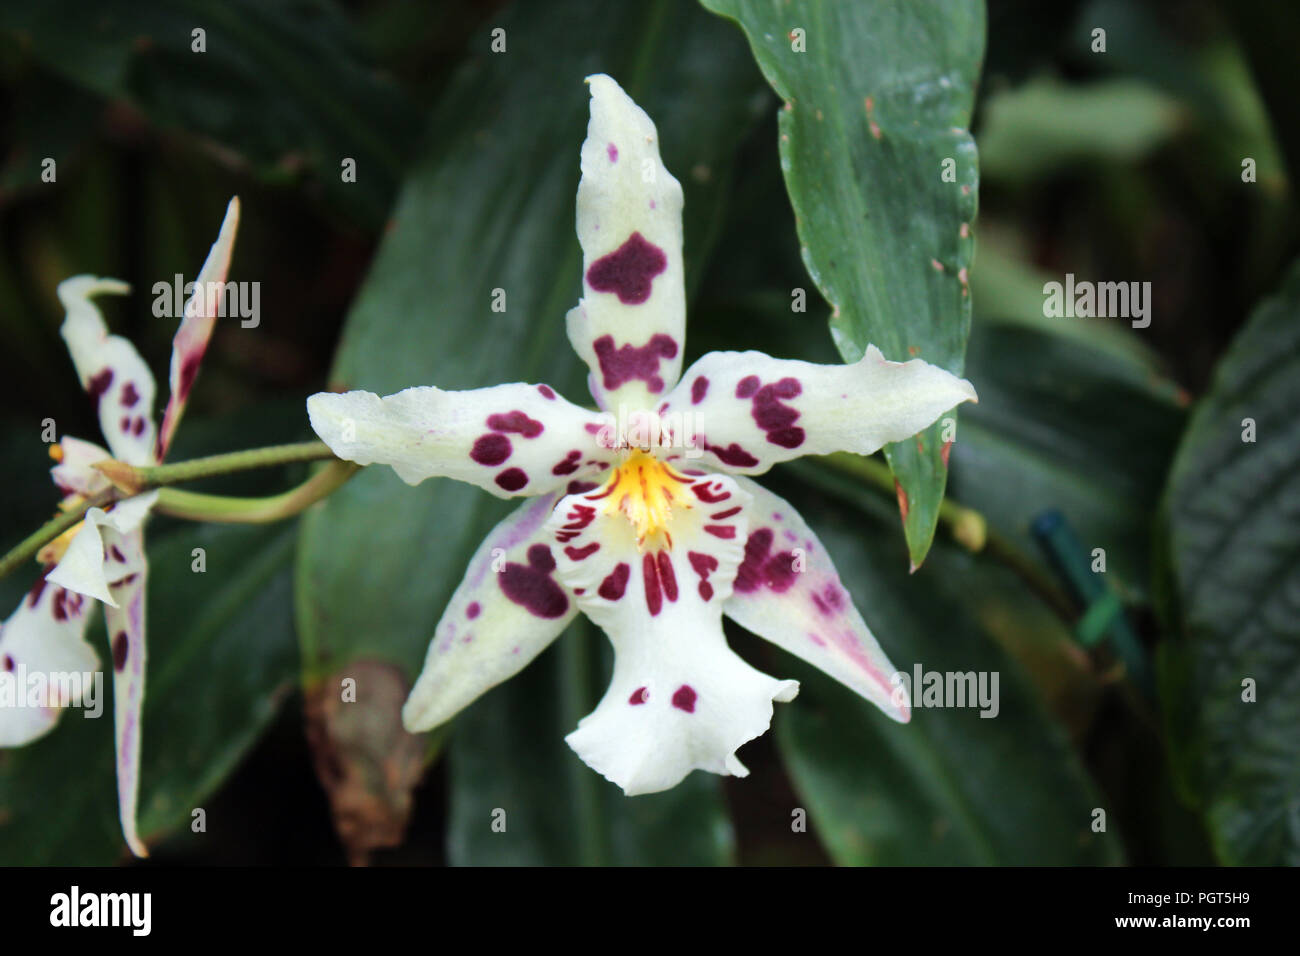 Close up of an Odontoglossum orchid with white petals with purple spots with a background of large green leaves Stock Photo